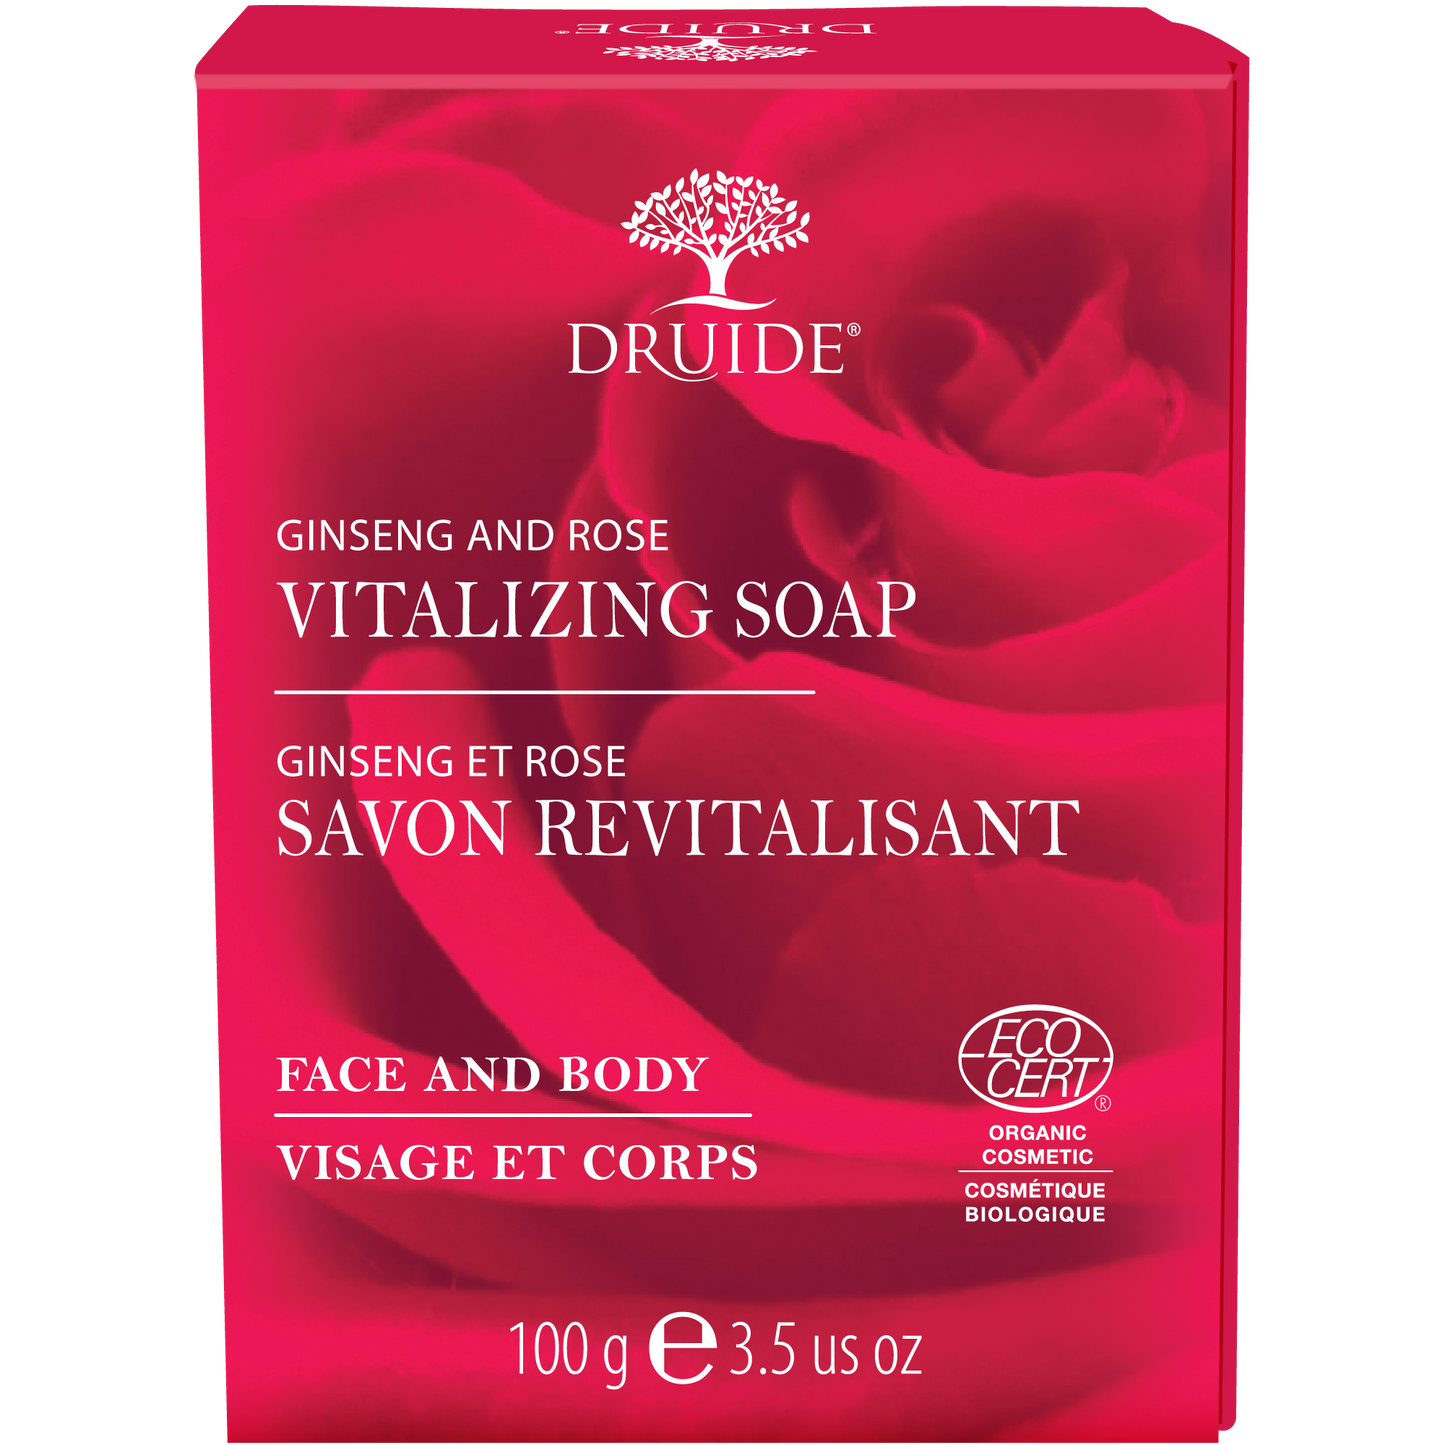 A bright pink box of Druide brand vitalizing soap with ginseng and rose